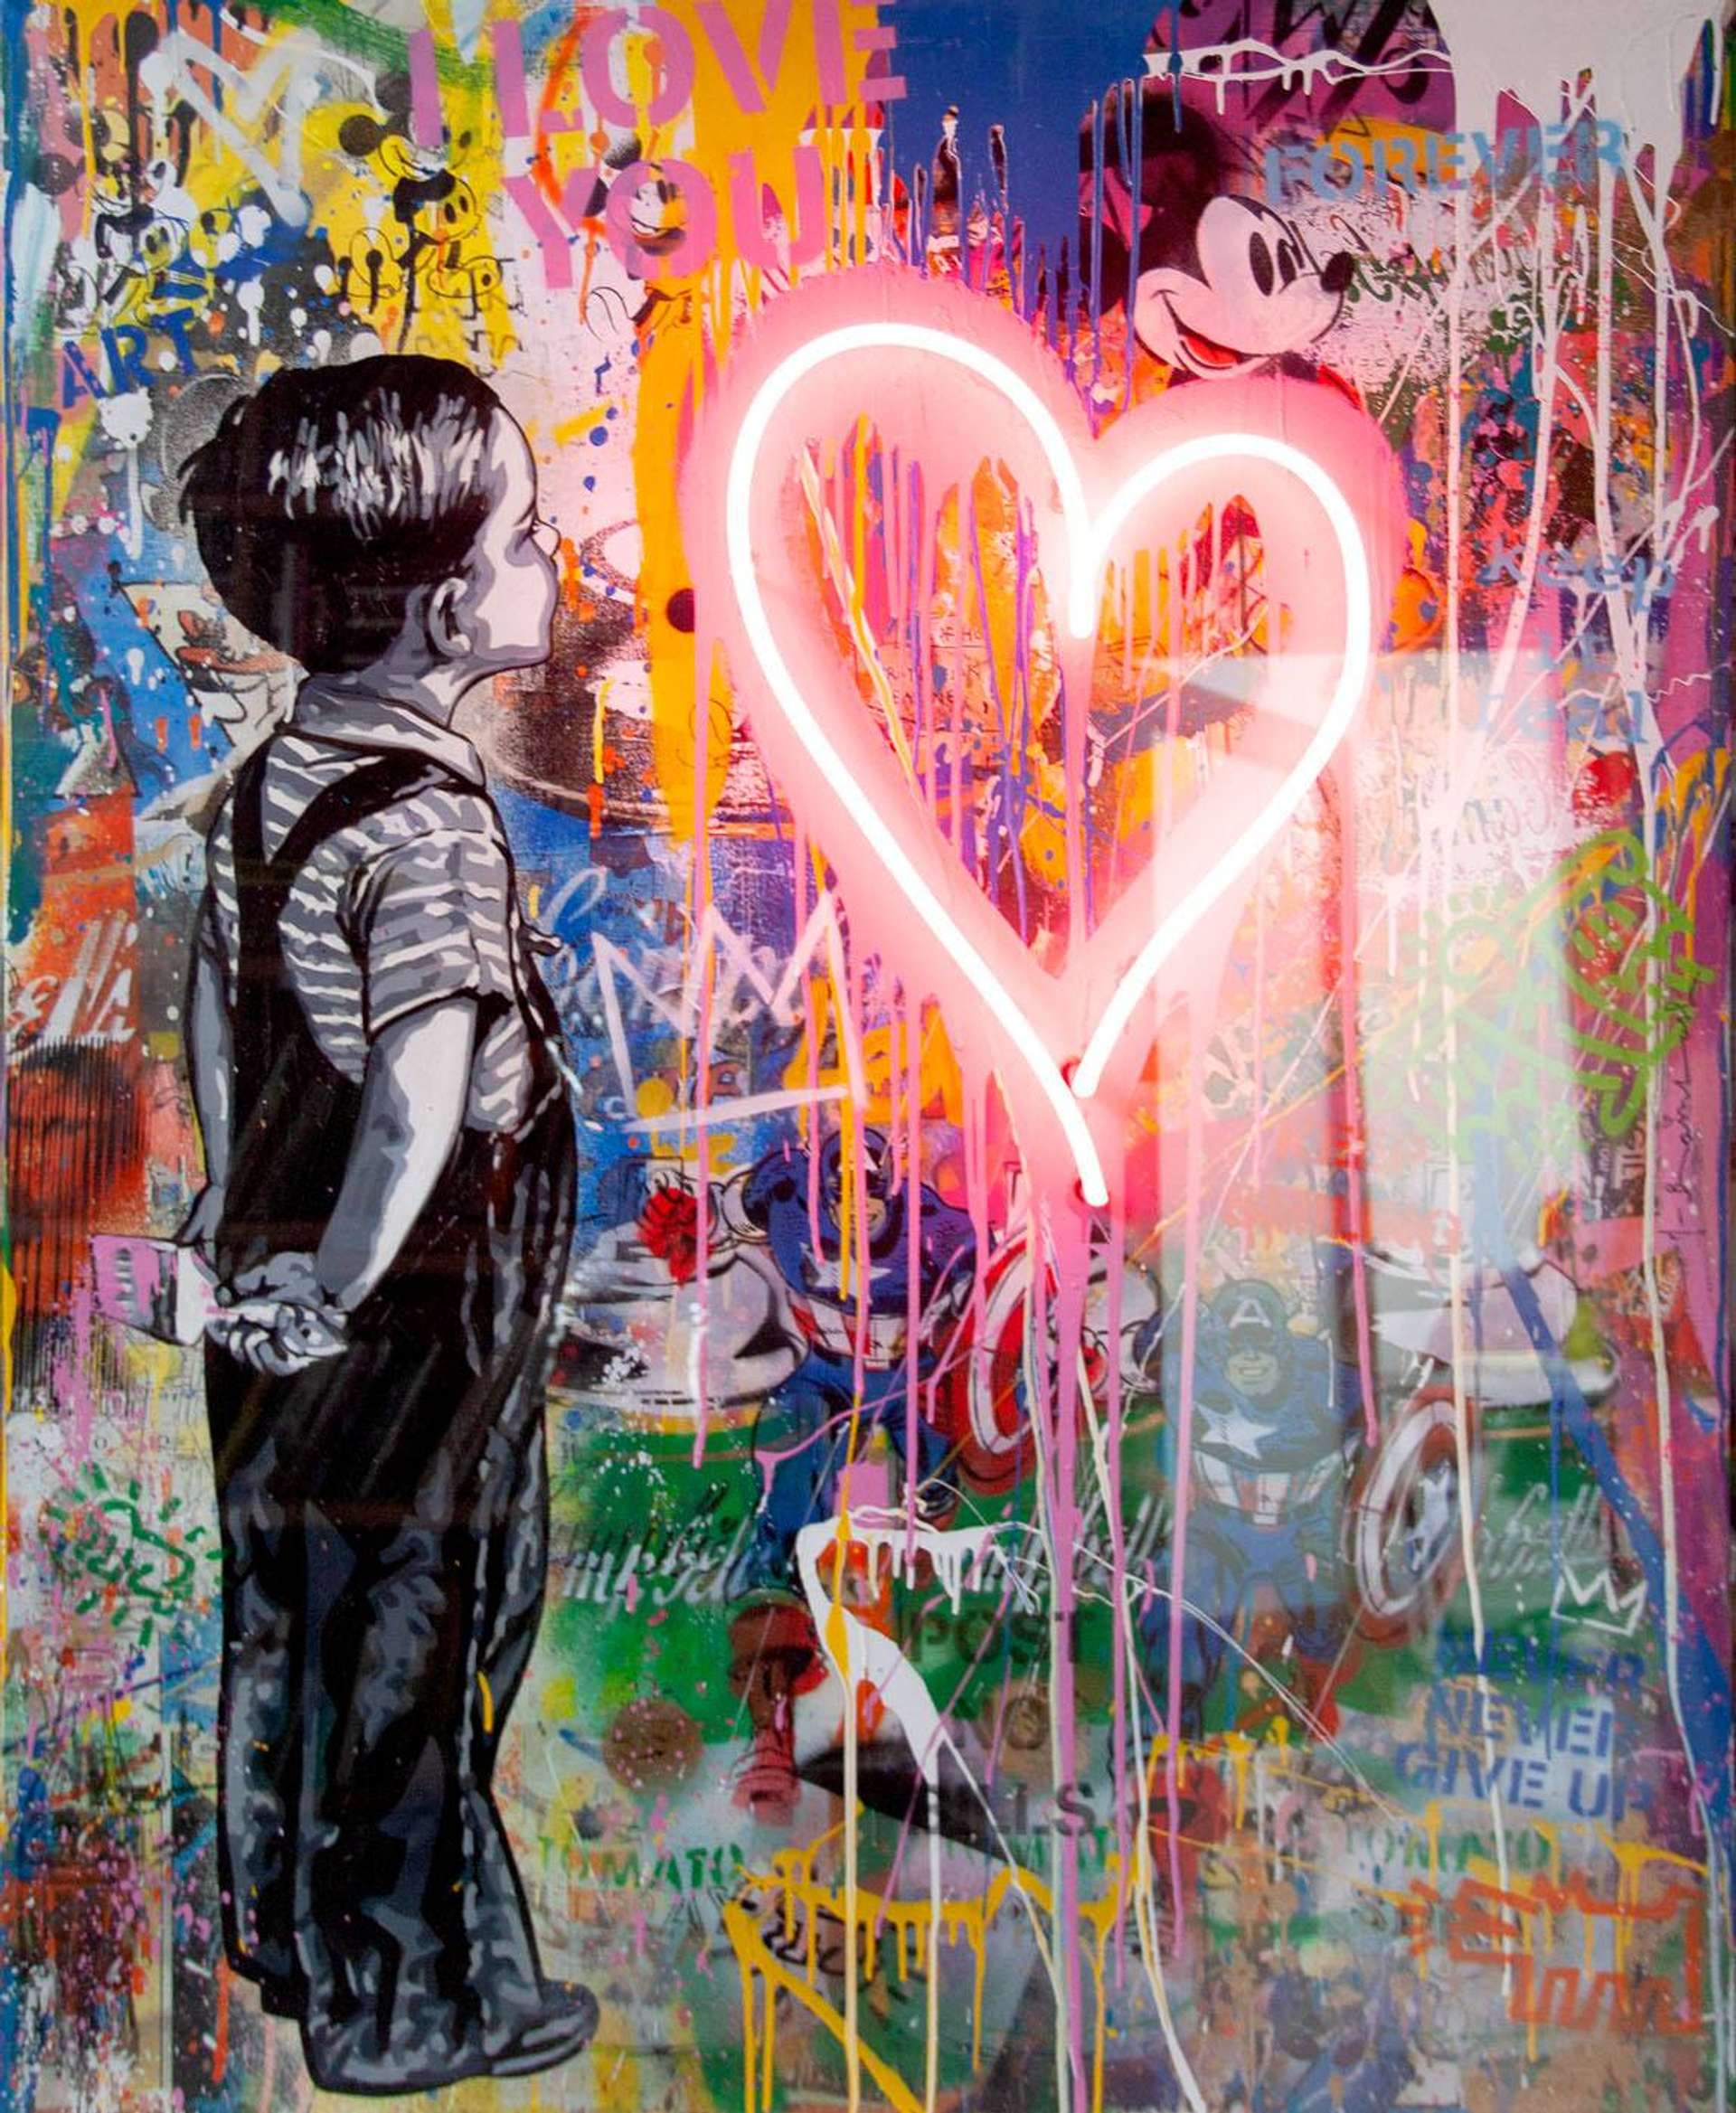  10 Facts About Mr. Brainwash